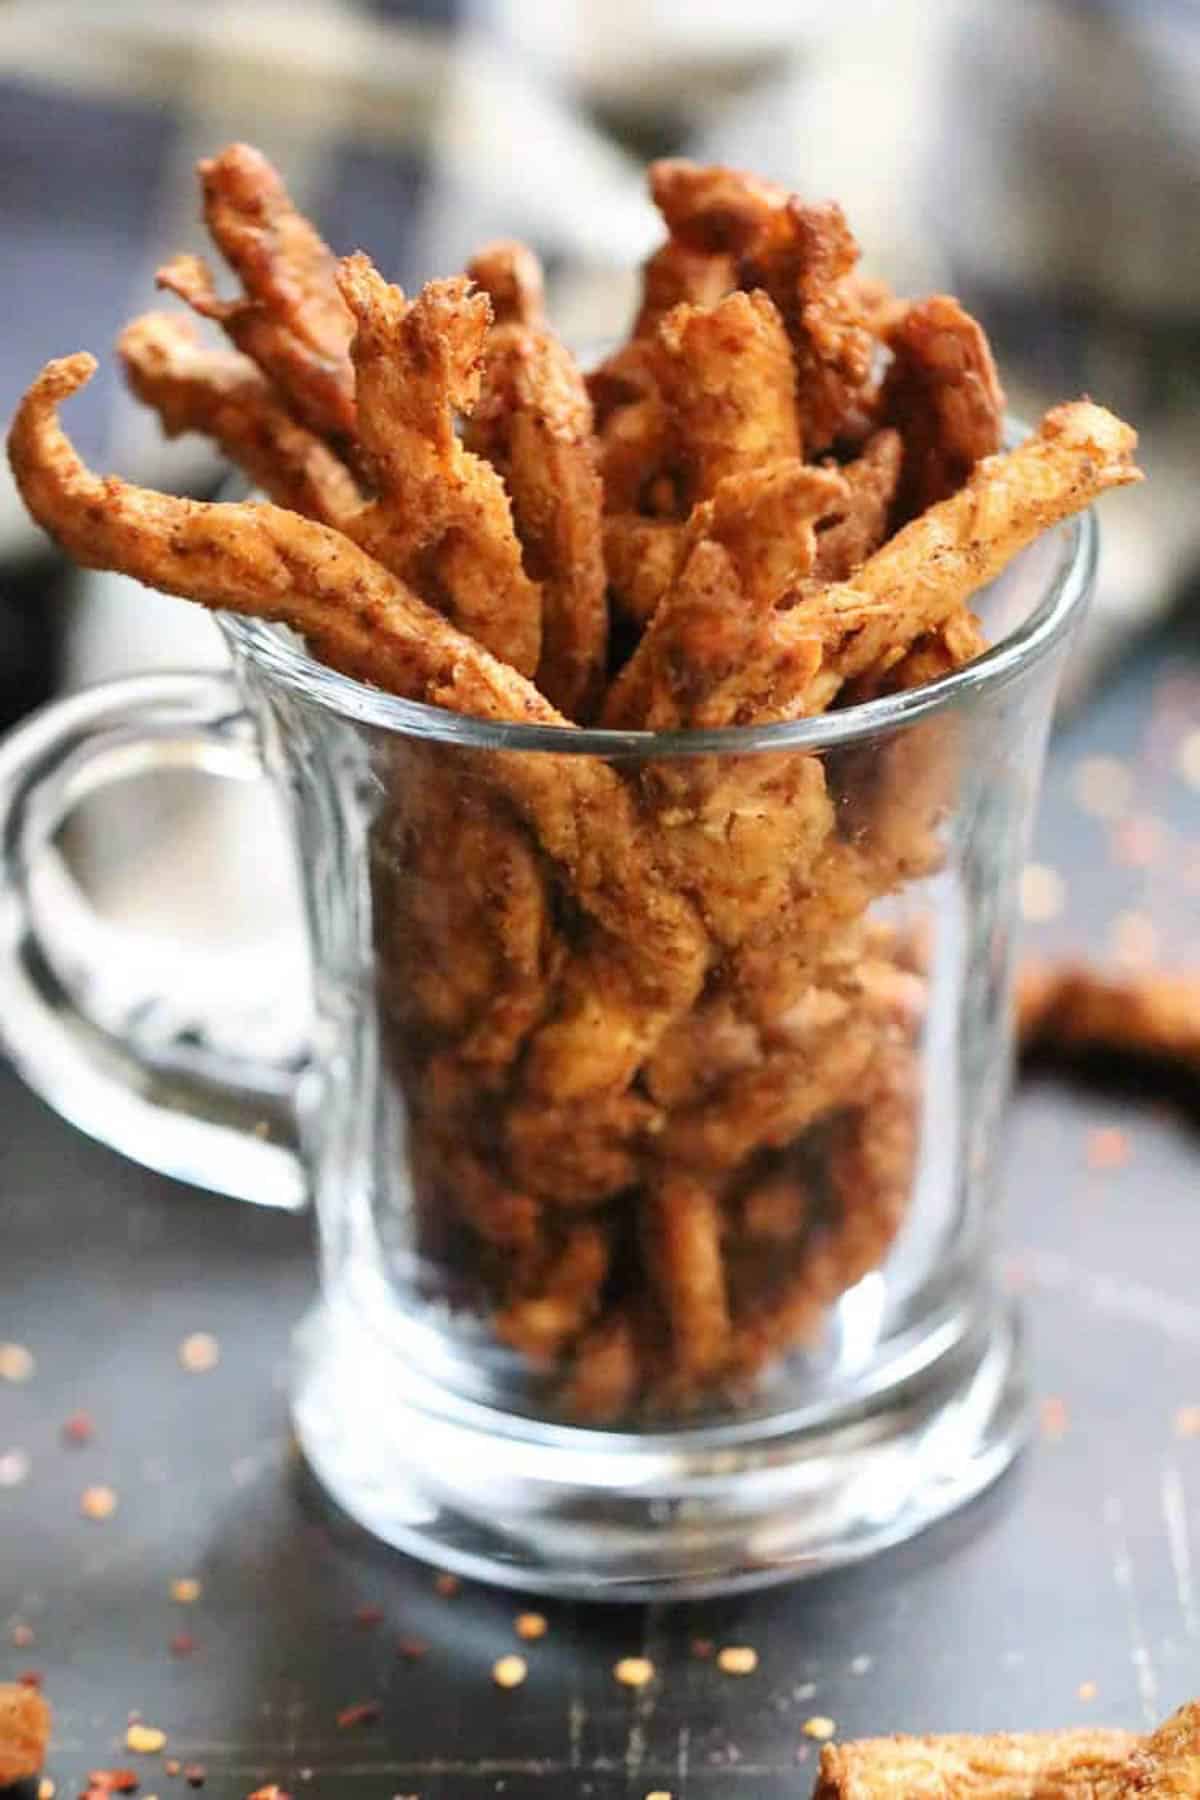 plant based soy jerky packed in a glass mug.